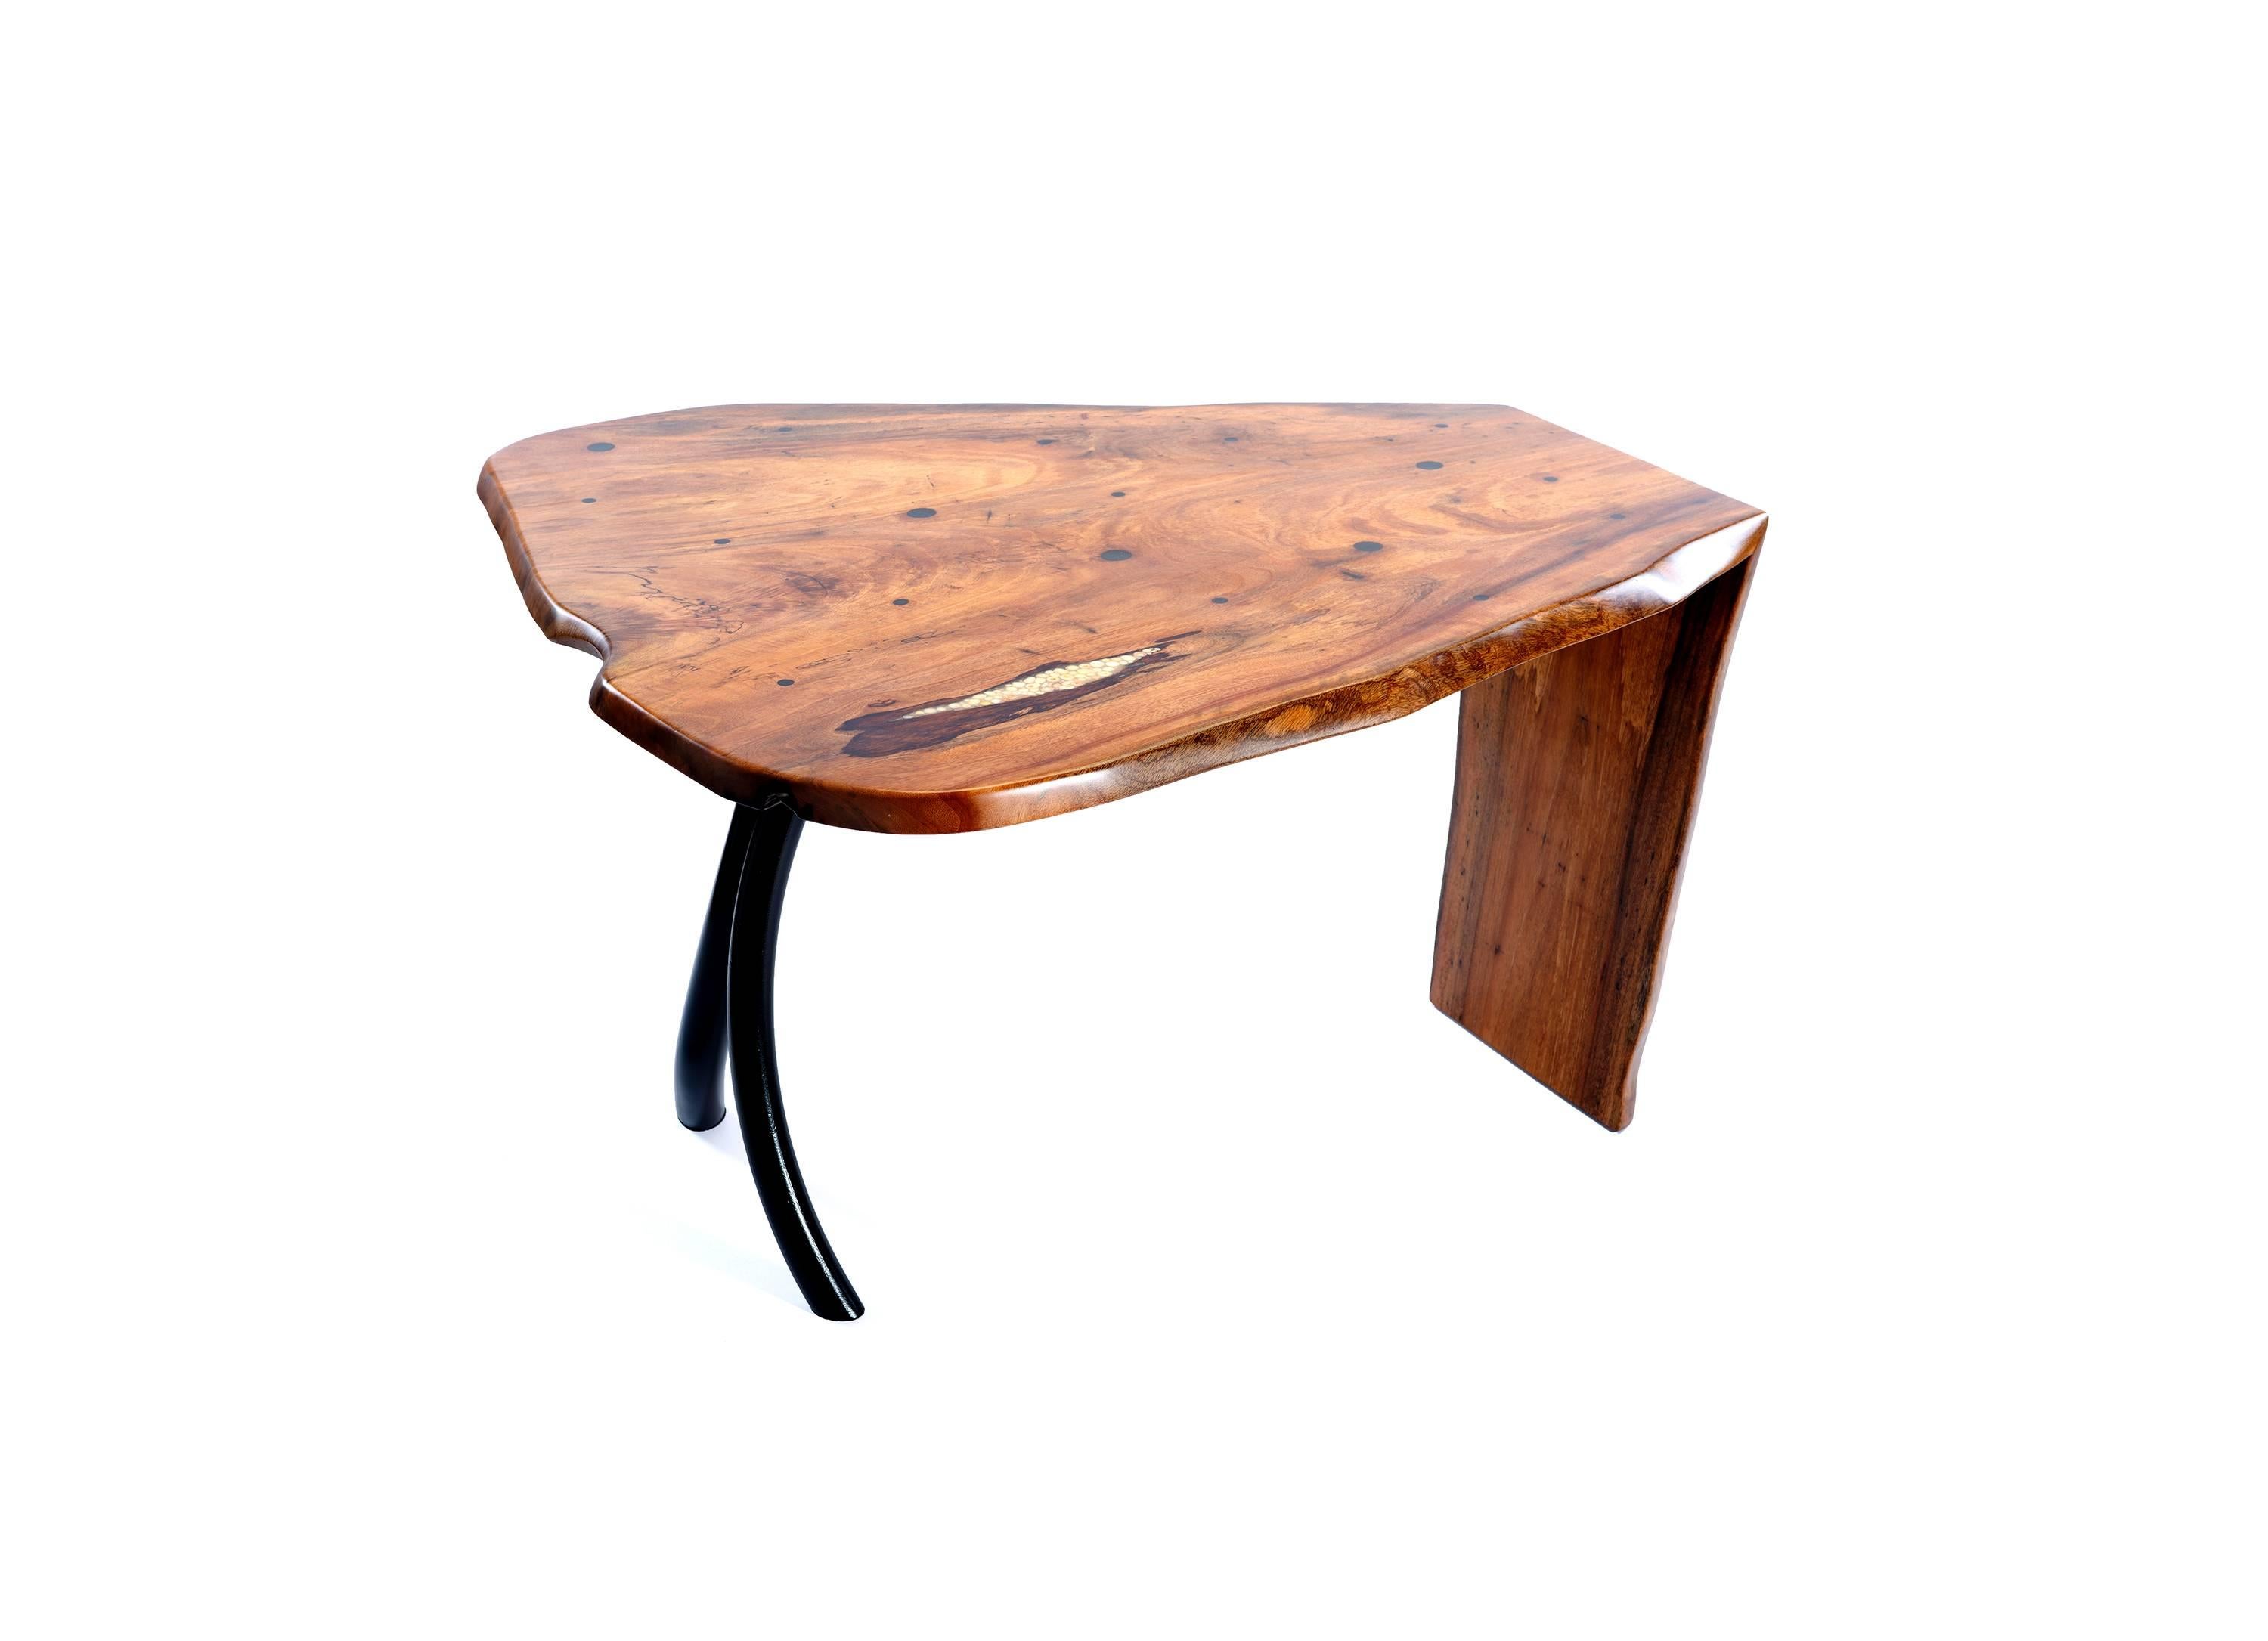 Untitled is a mango wood, black composite, pearl and forged steel table by Steve Tobin.

Steve Tobin is an American sculptor. Much of his work draws inspiration from nature, and the Christian Science Monitor has described his sculptures as